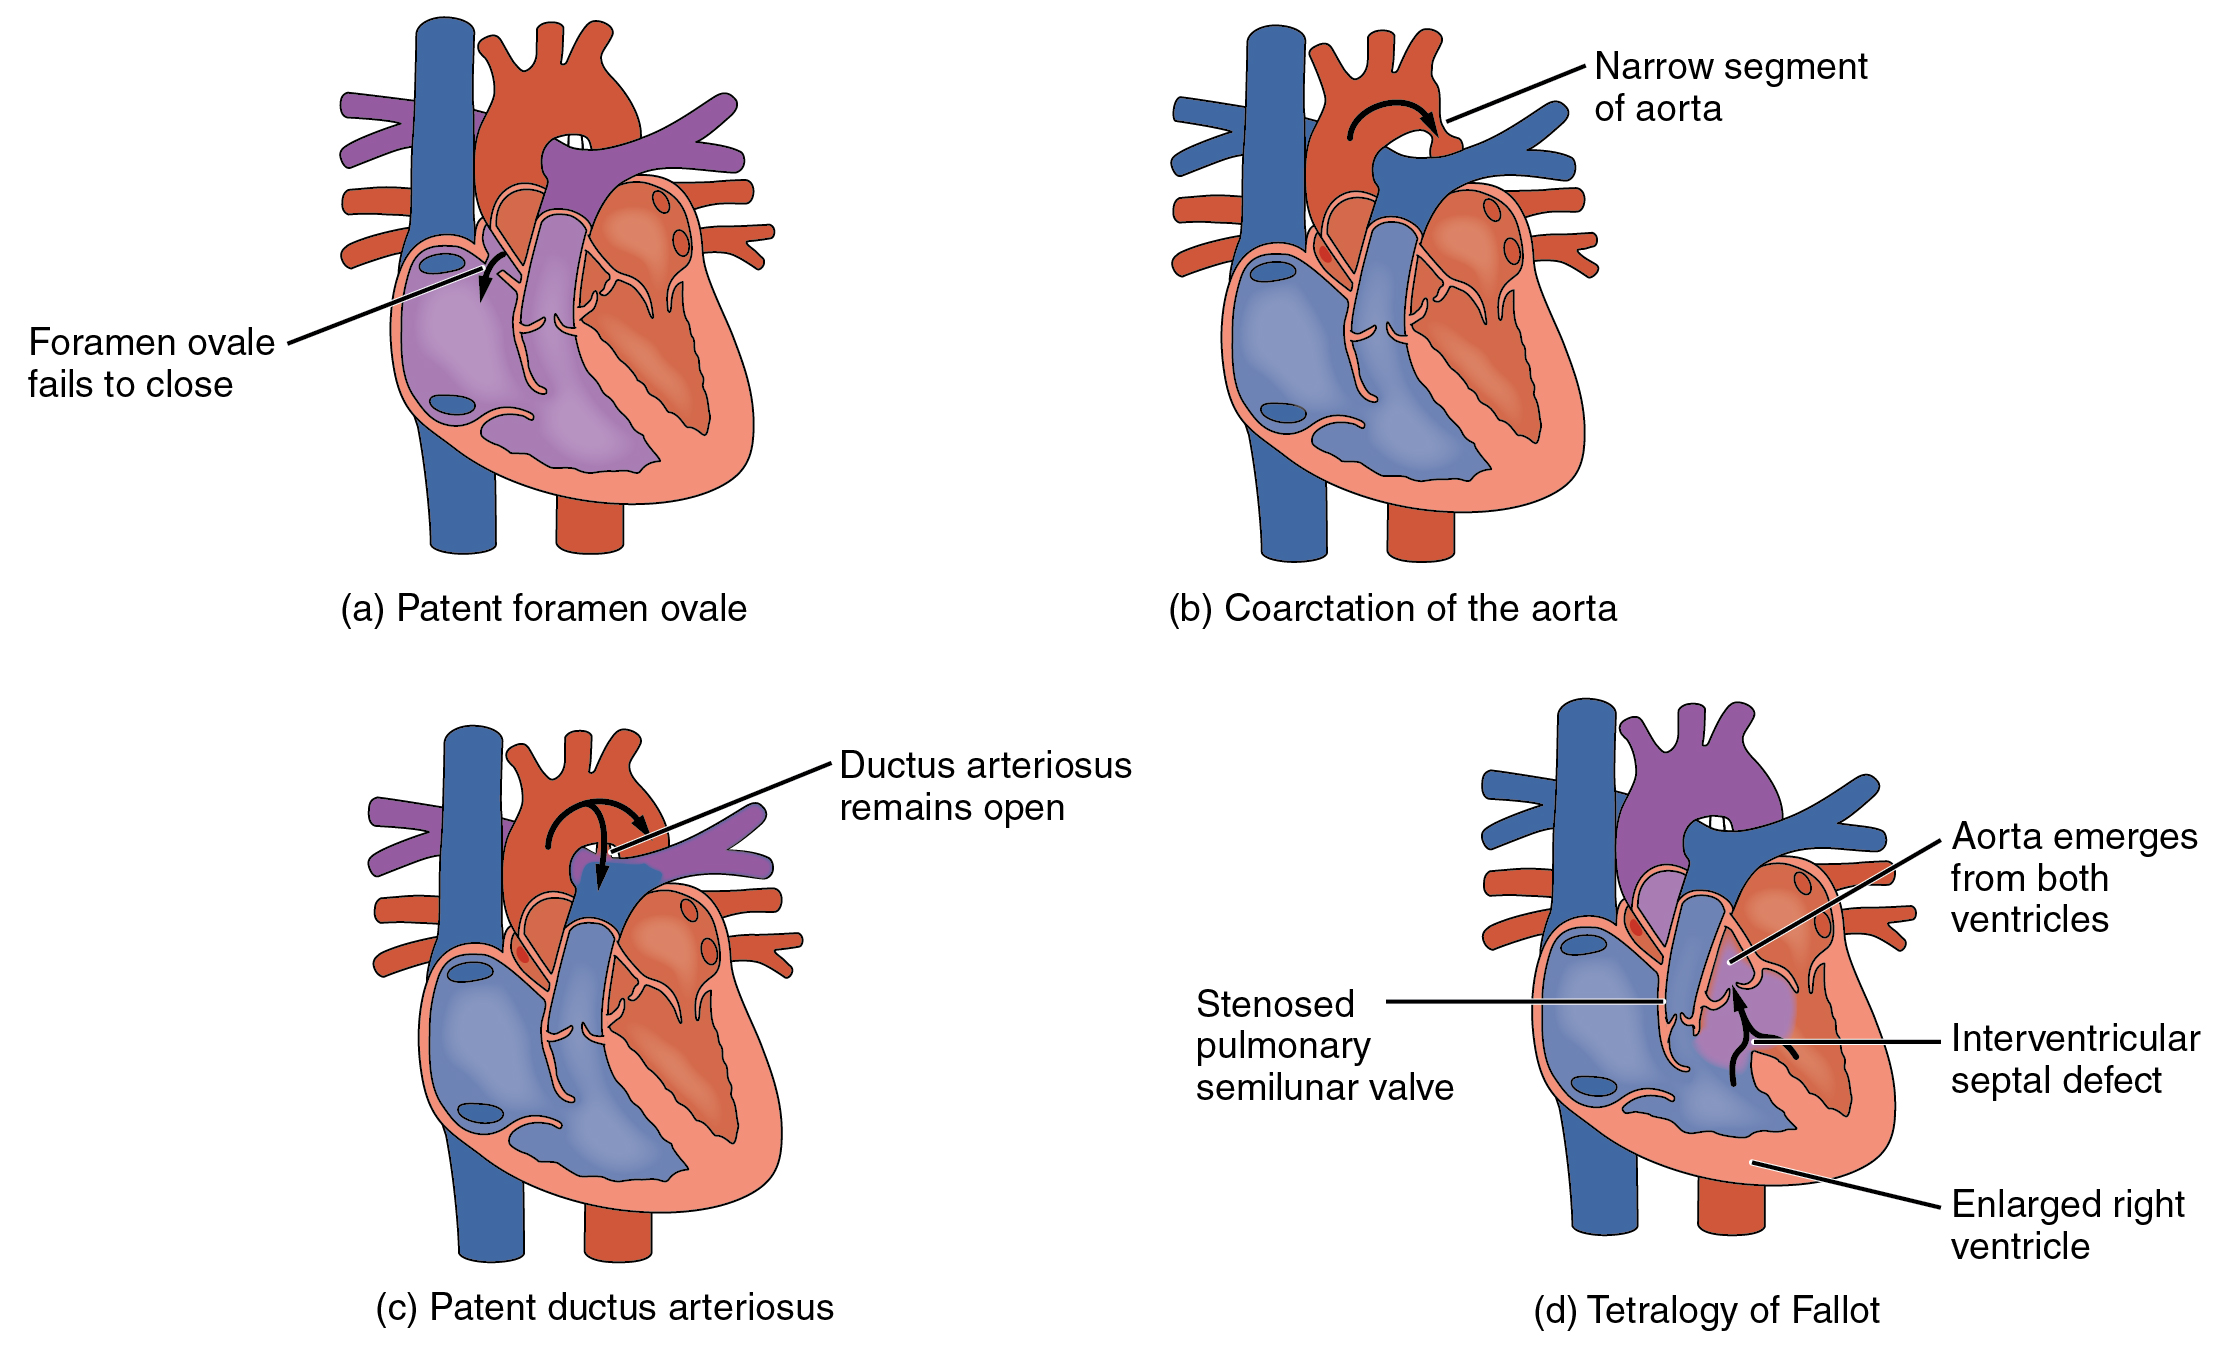 This diagram shows the structure of the heart with different congenital defects. The top left panel shows patent foramen ovale, the top right panel shows coarctation of the aorta, the bottom left panel shows patent ductus ateriosus and the bottom right shows tetralogy of fallot.